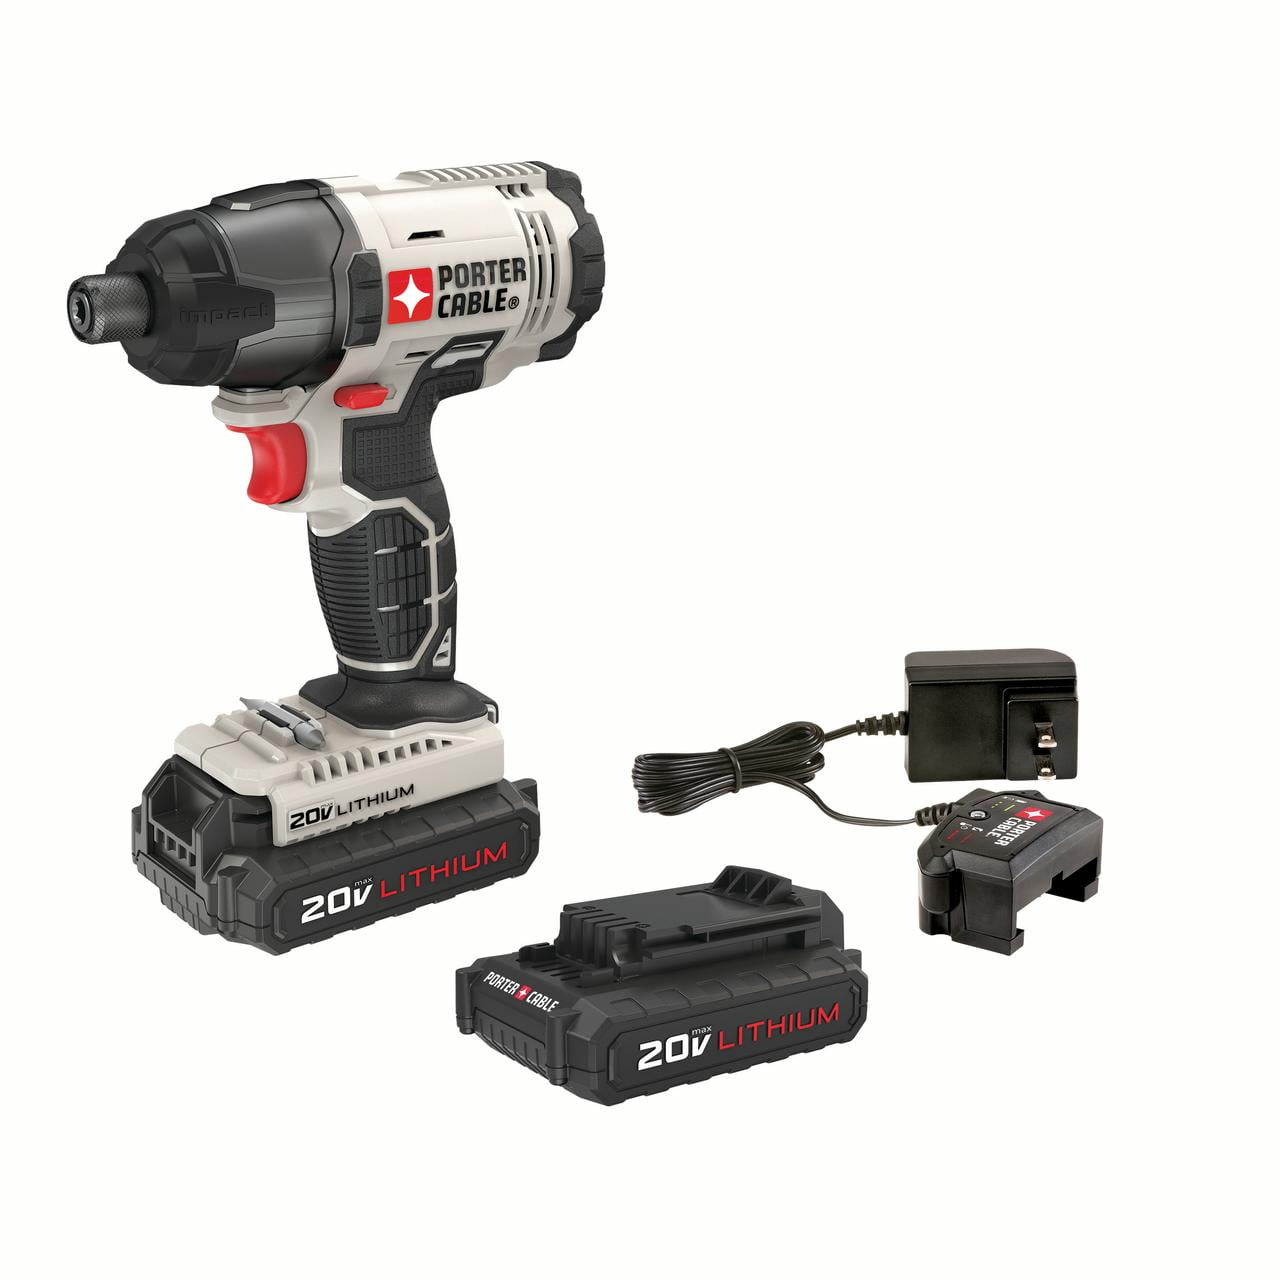 PORTER CABLE 20-Volt Max Lithium-Ion Cordless Compact Impact